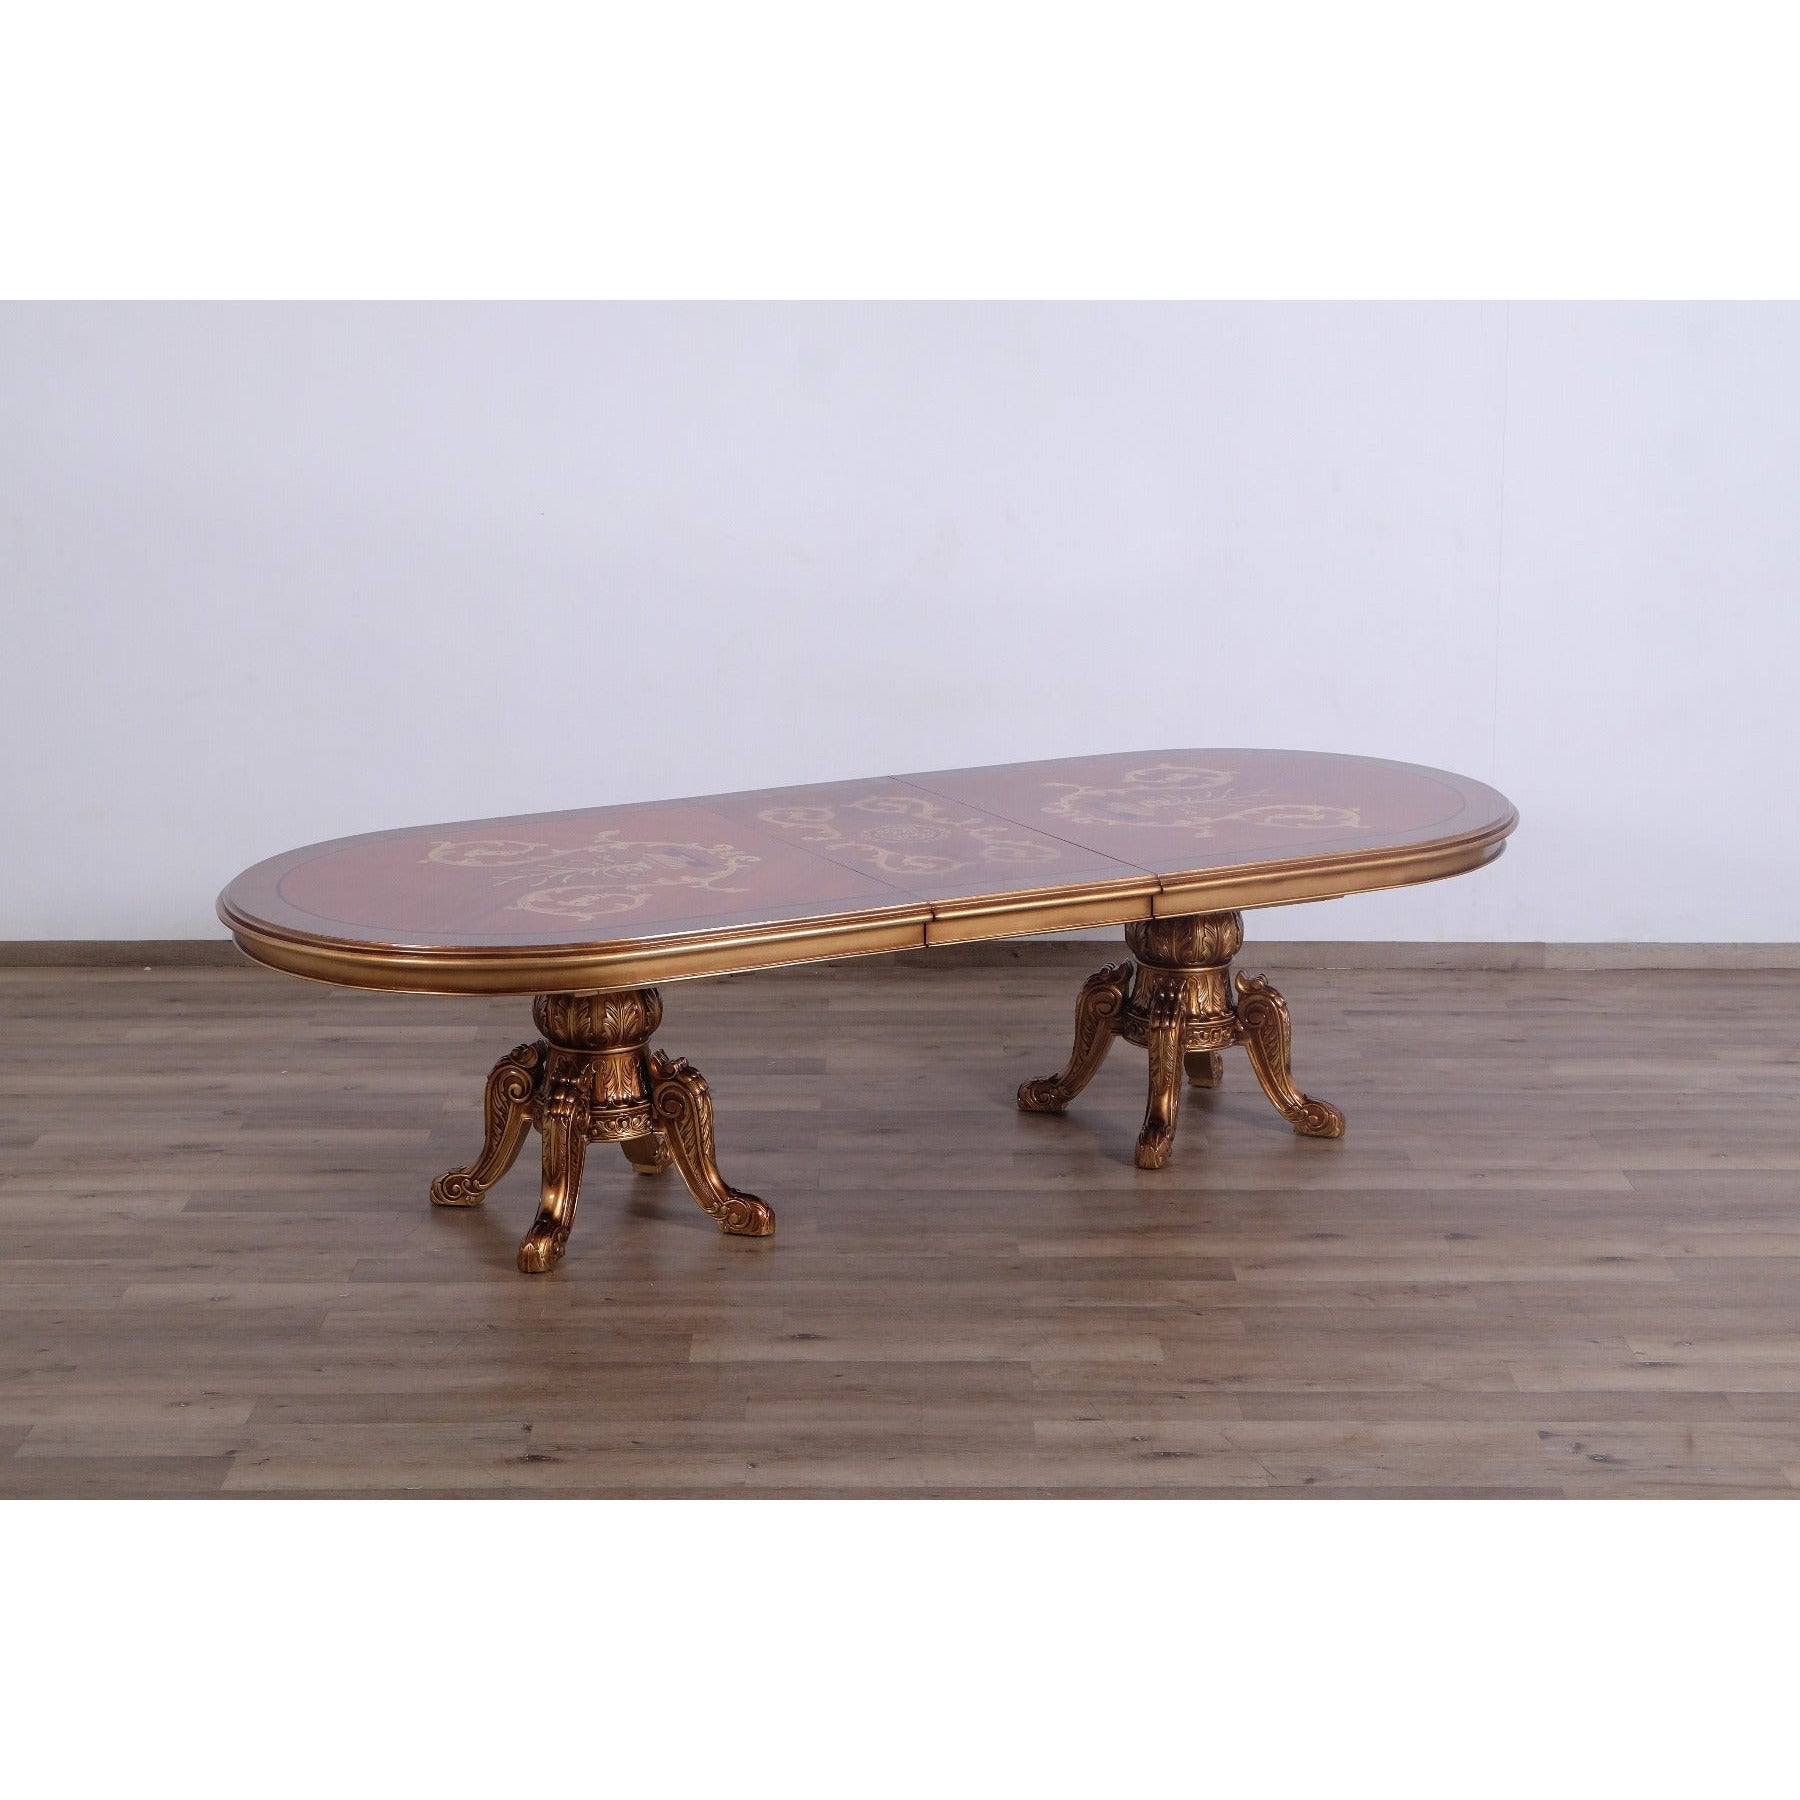 European Furniture - Maggiolini Dining Table in Brown and Gold Leaf - 61952-DT - New Star Living